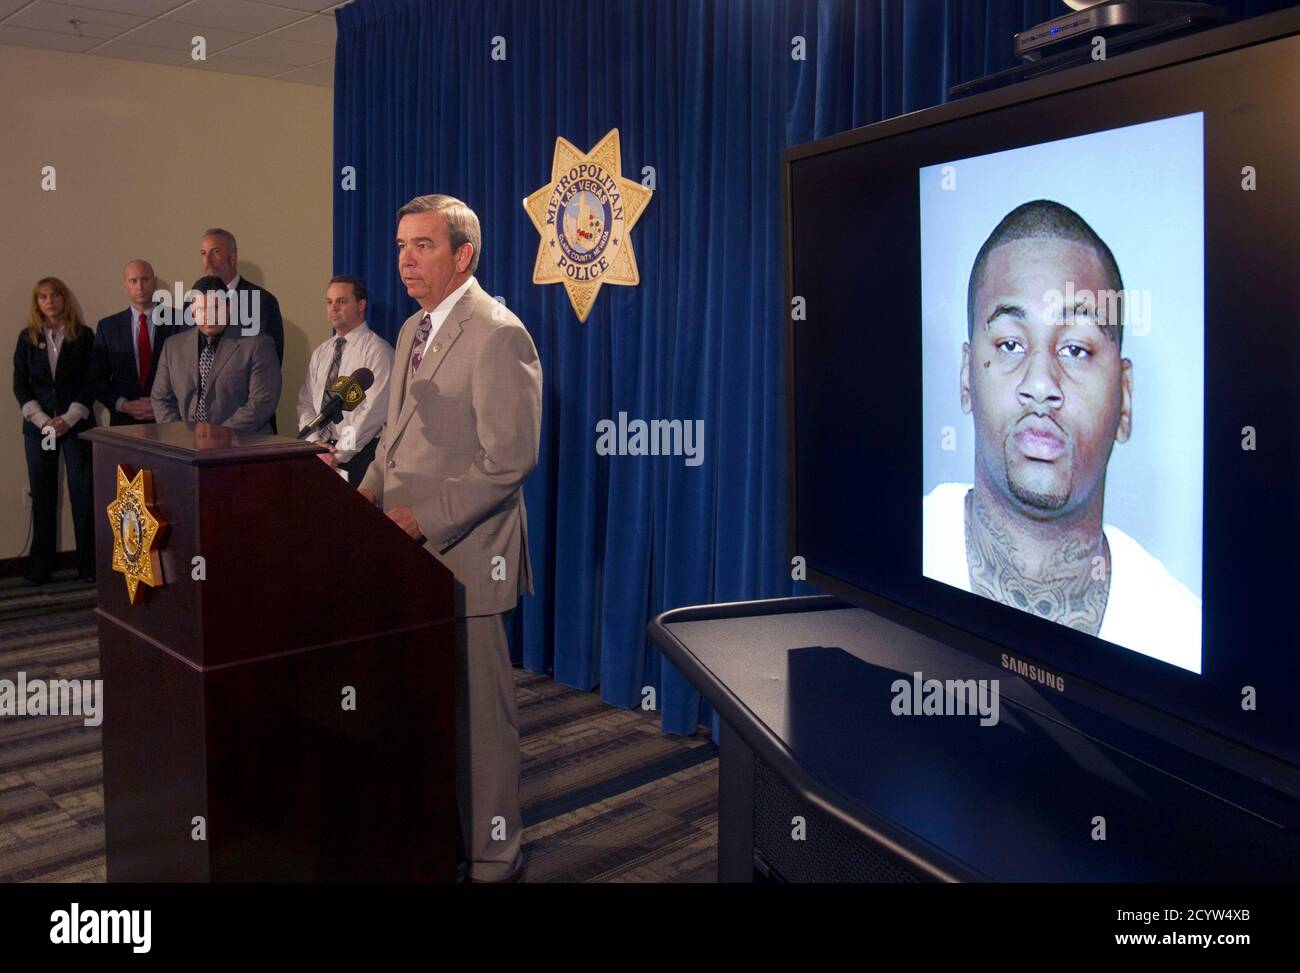 Las Vegas Metropolitan Police Sheriff Douglas Gillespie speaks during a news conference at police headquarters in Las Vegas, Nevada February 28, 2013, after Ammar Harris was arrested in Studio City, Southern California. Harris, 26, is the suspect in a February 21 shooting and accident on the Las Vegas Strip that left three people dead. REUTERS/Steve Marcus/Las Vegas Sun (UNITED STATES - Tags: CRIME LAW) Stock Photo